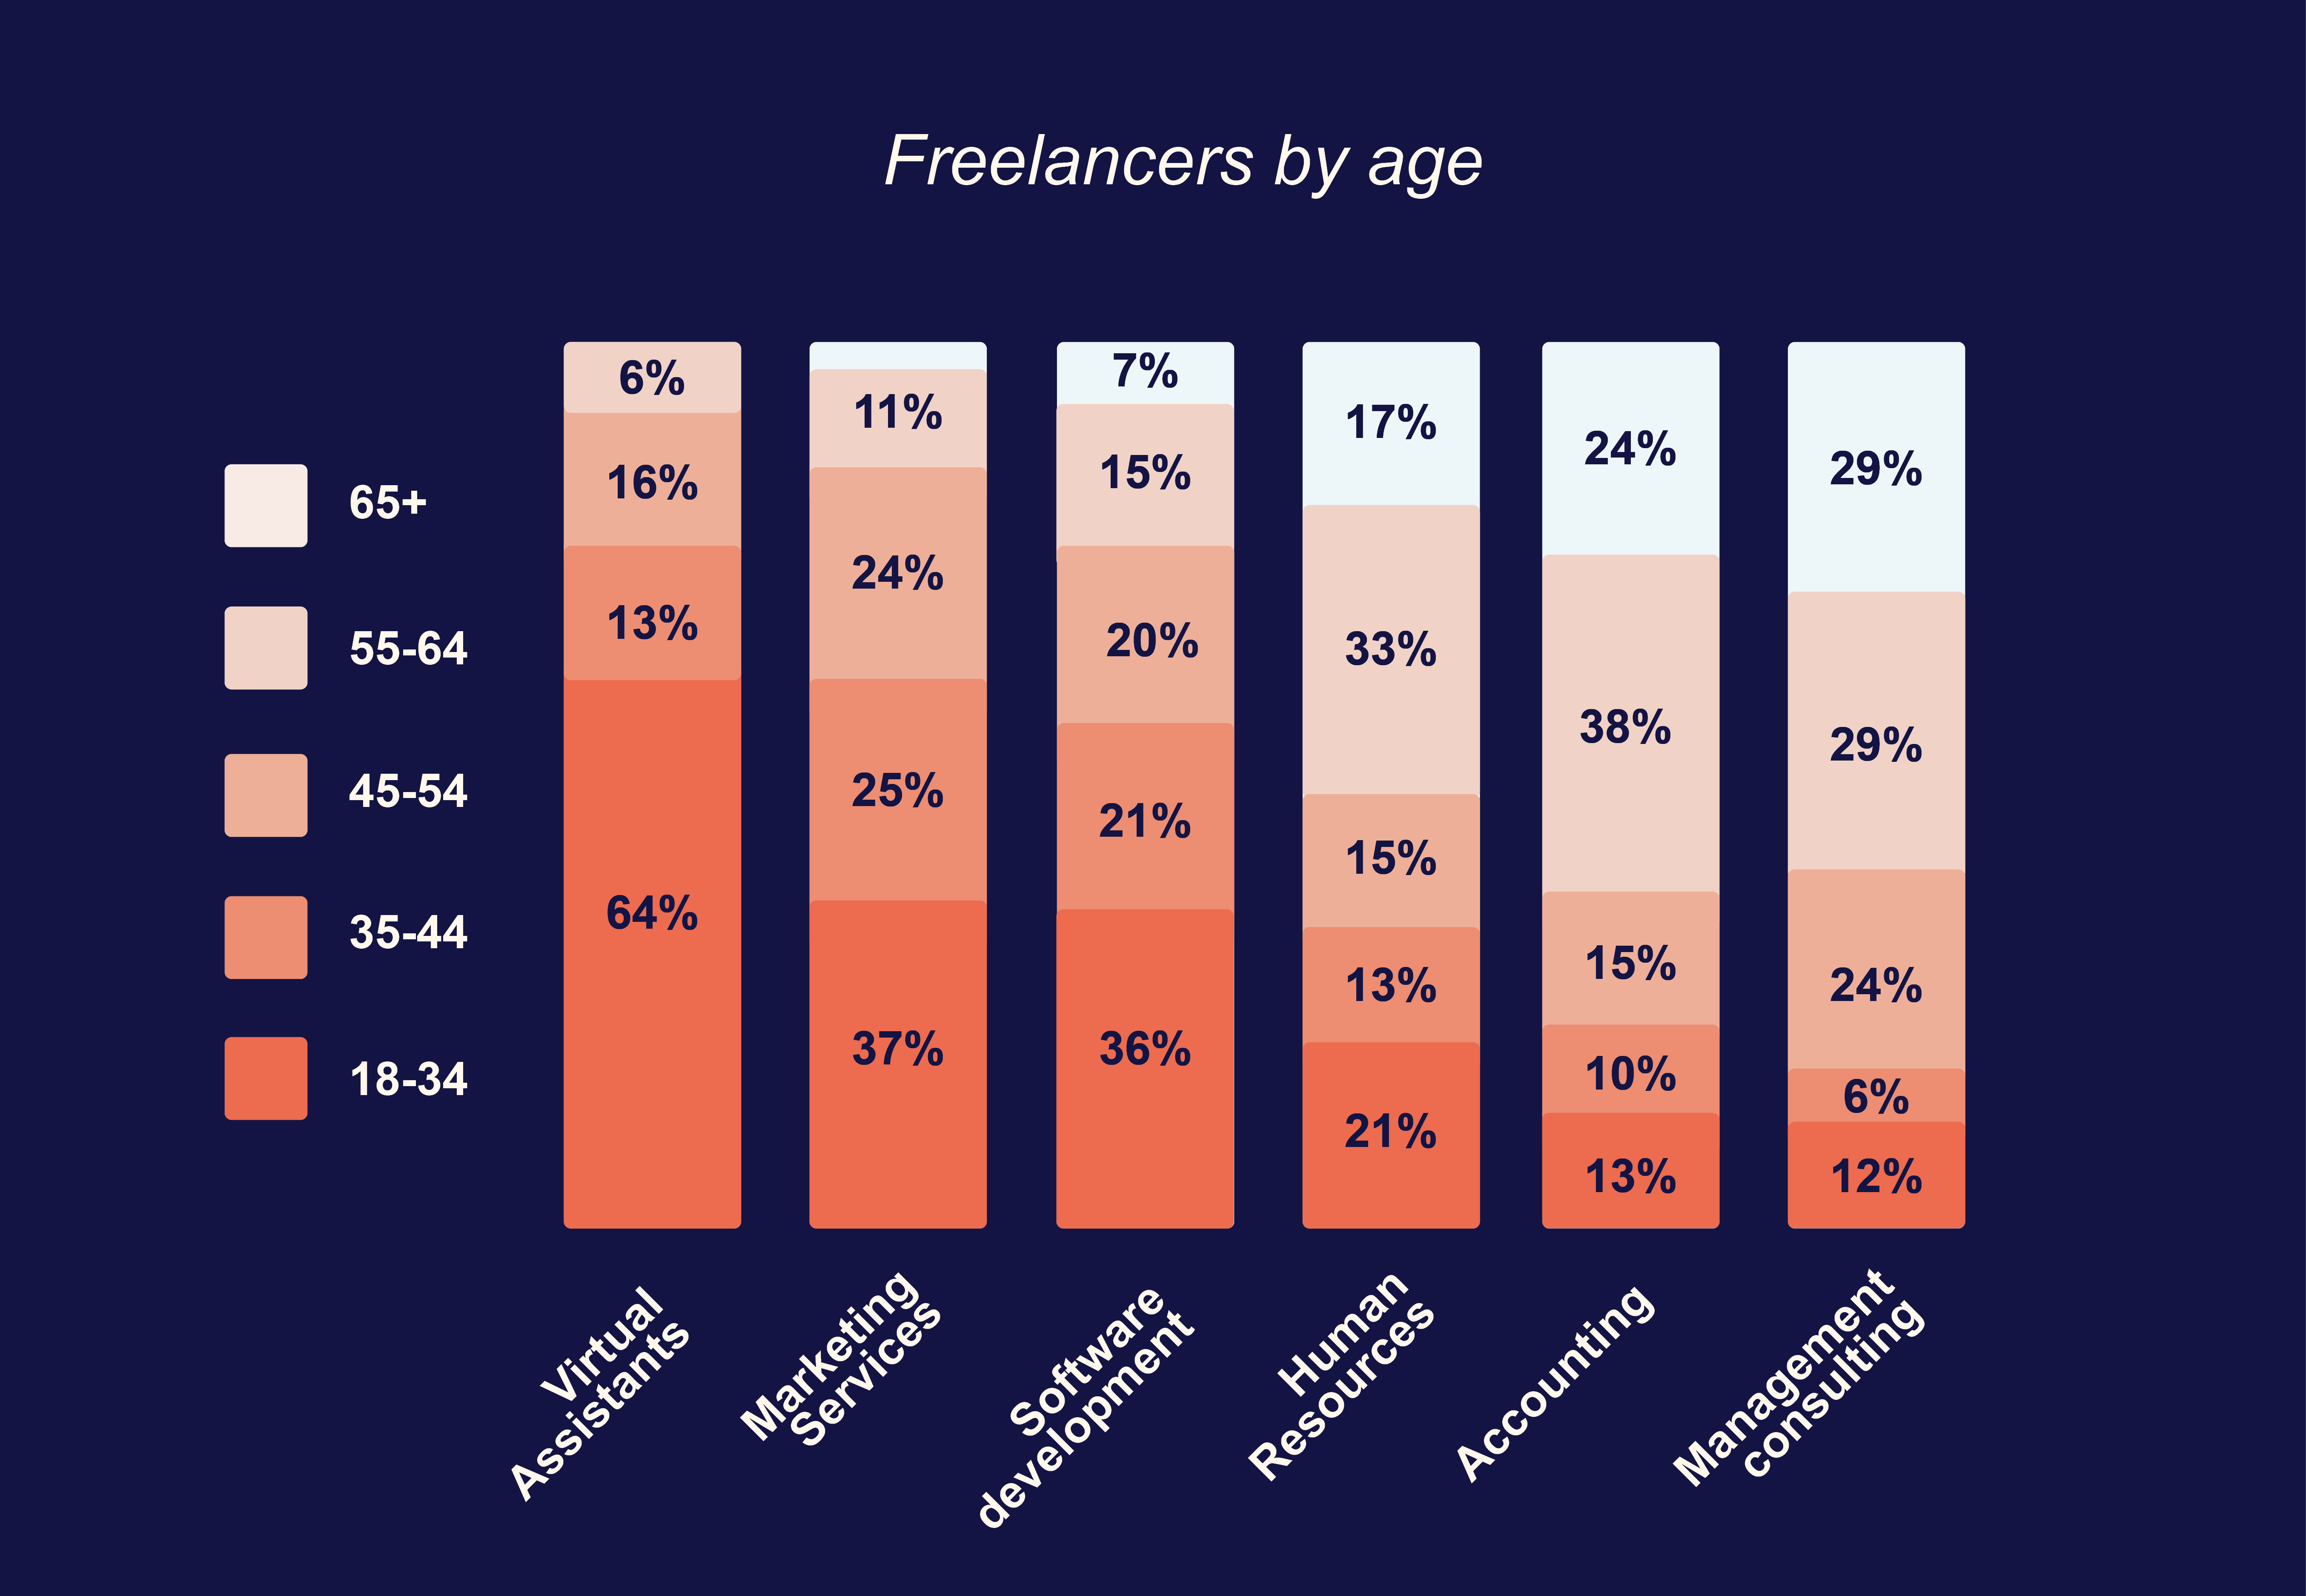 Freelancers by age